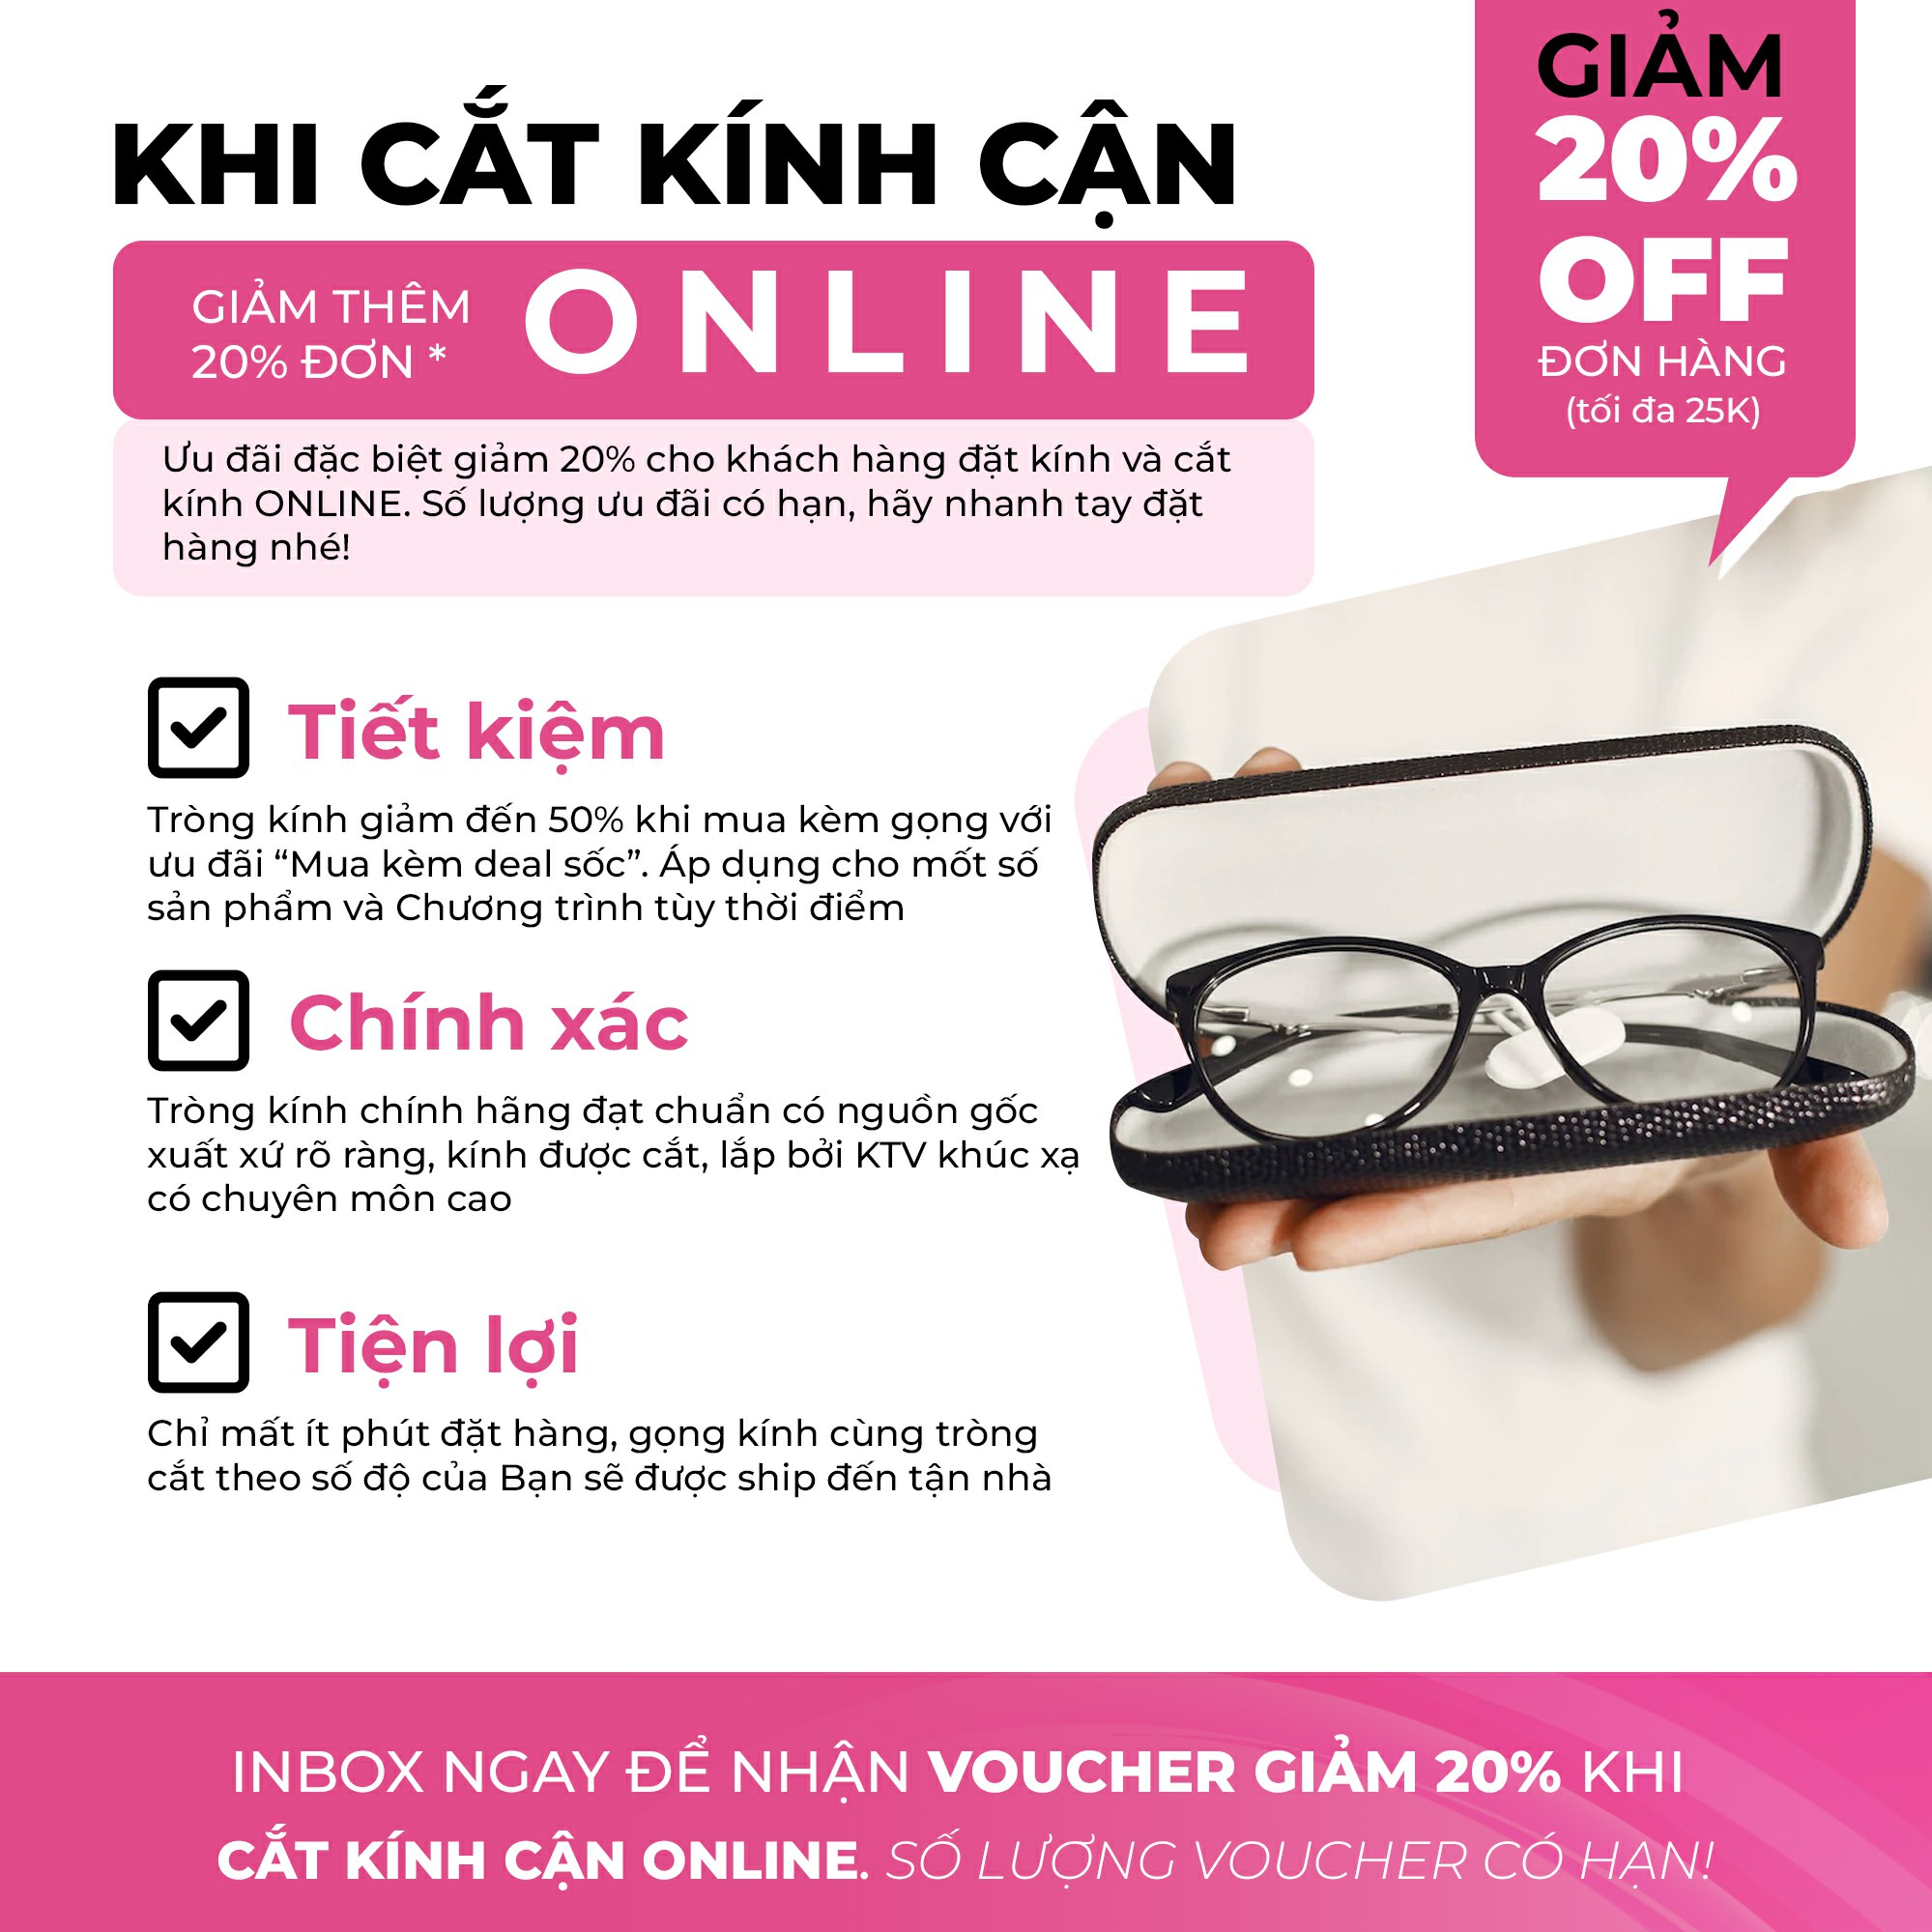 gong-kinh-ouress-cat-kinh-online-0e2437a9-0f71-48c1-a11e-4443216844bf.jpg?v=1673675296326